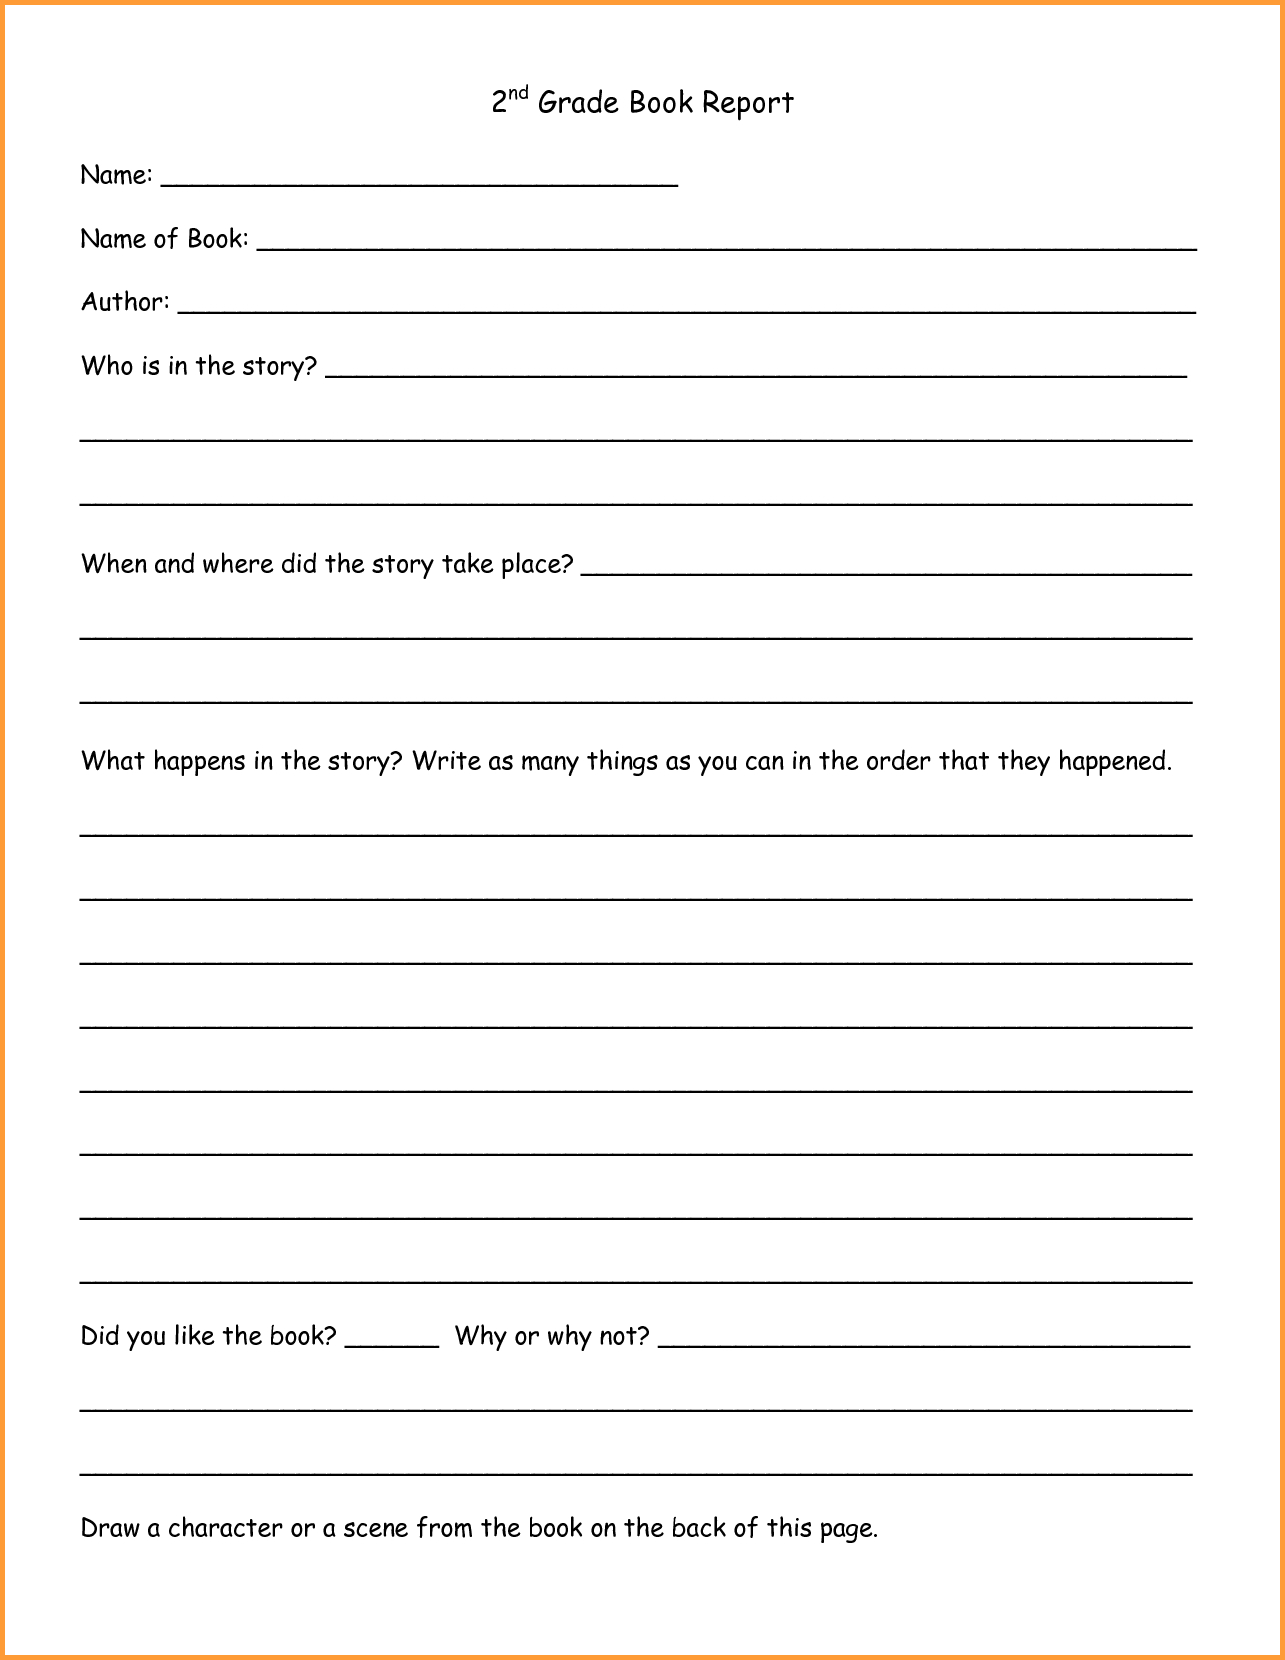 Story Report Template – Zohre.horizonconsulting.co In 2Nd Grade Book Report Template